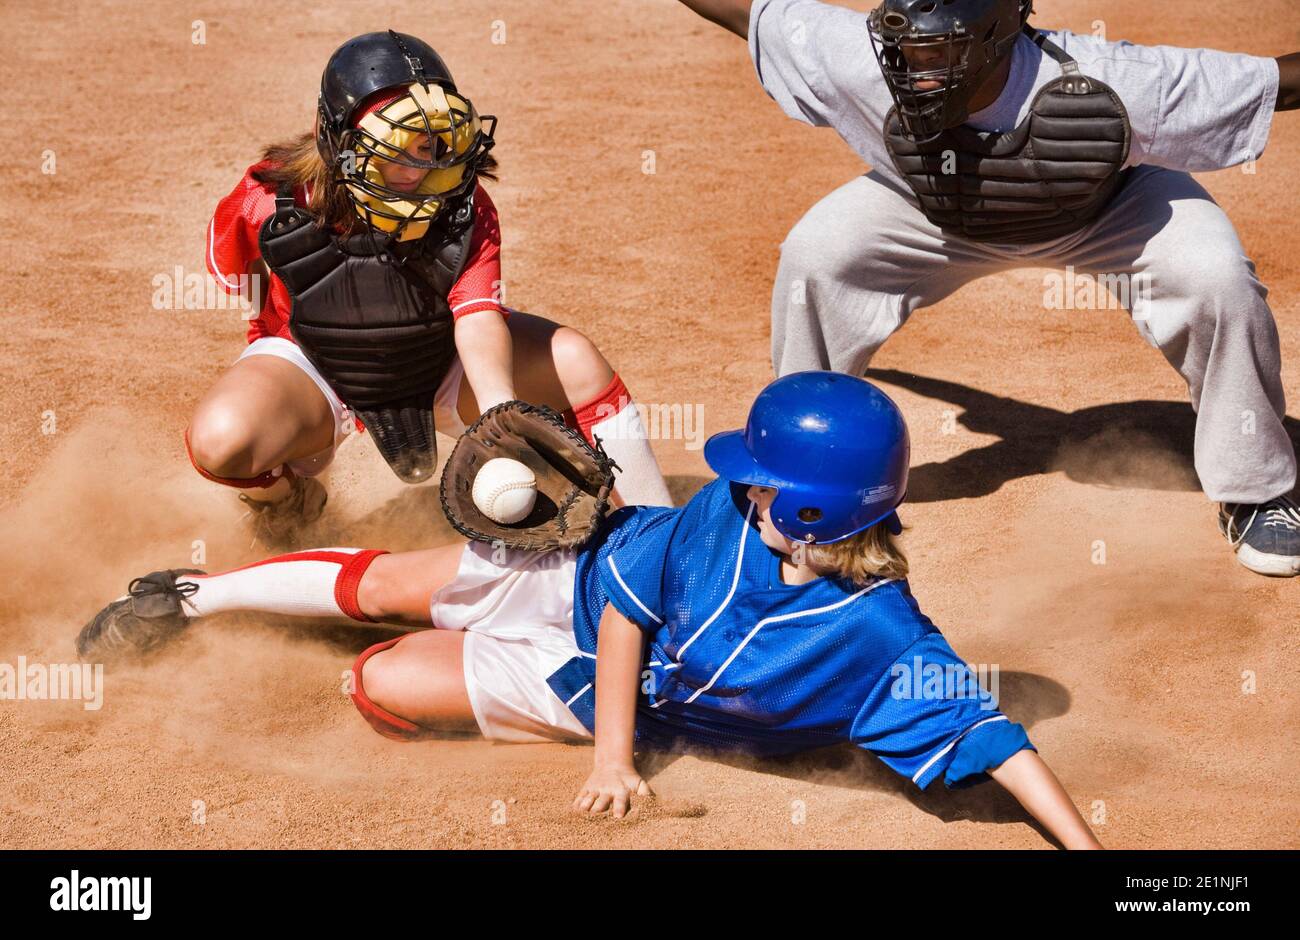 Softball player sliding into home plate while umpire rules safe Stock Photo